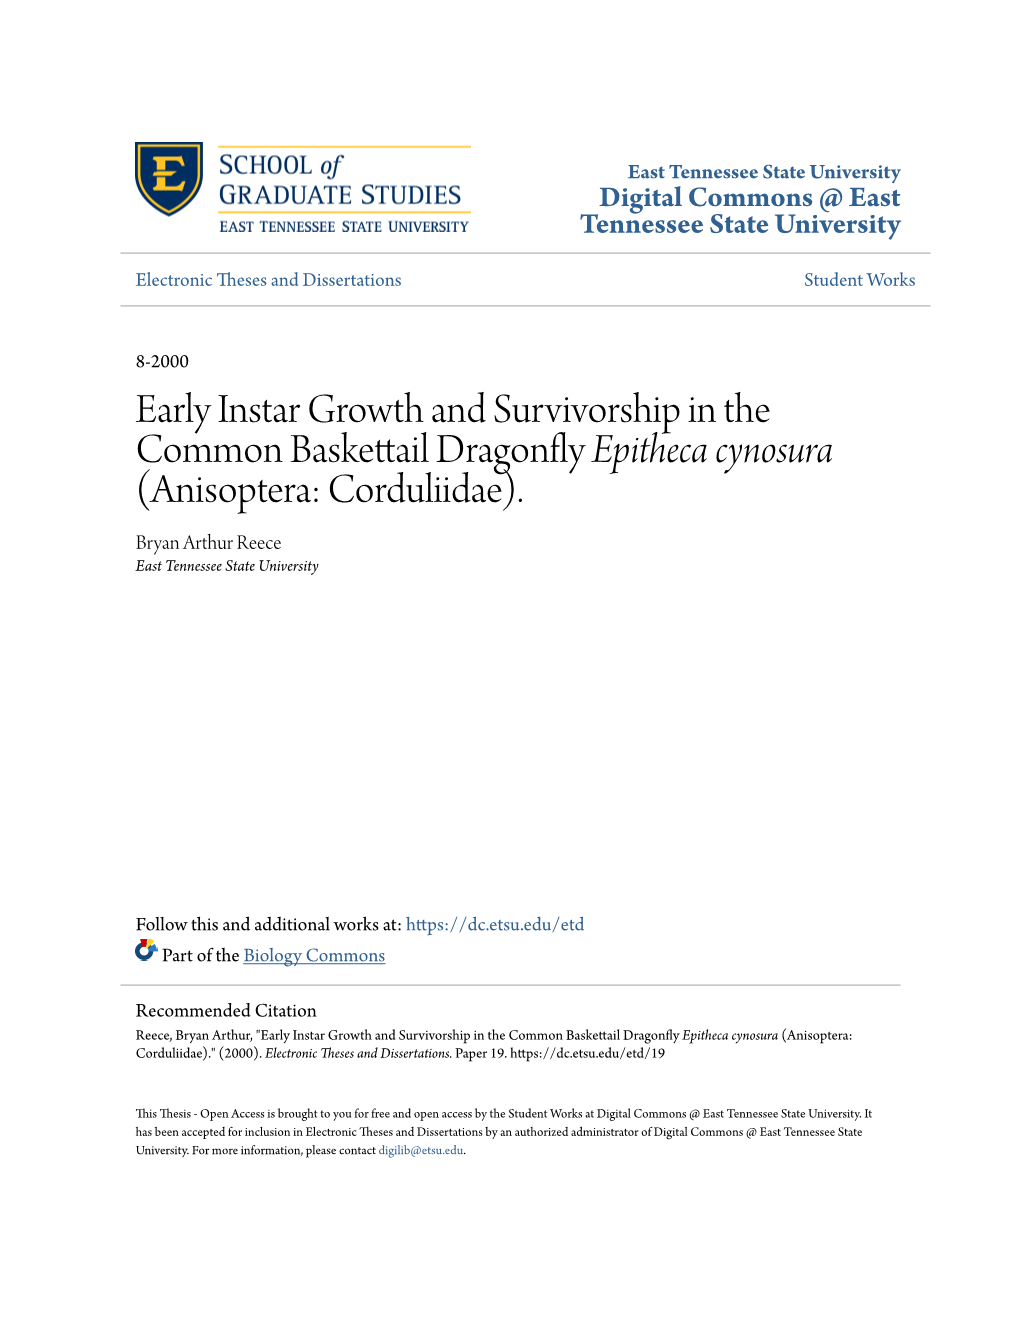 Early Instar Growth and Survivorship in the Common Baskettail Dragonfly Epitheca Cynosura (Anisoptera: Corduliidae)